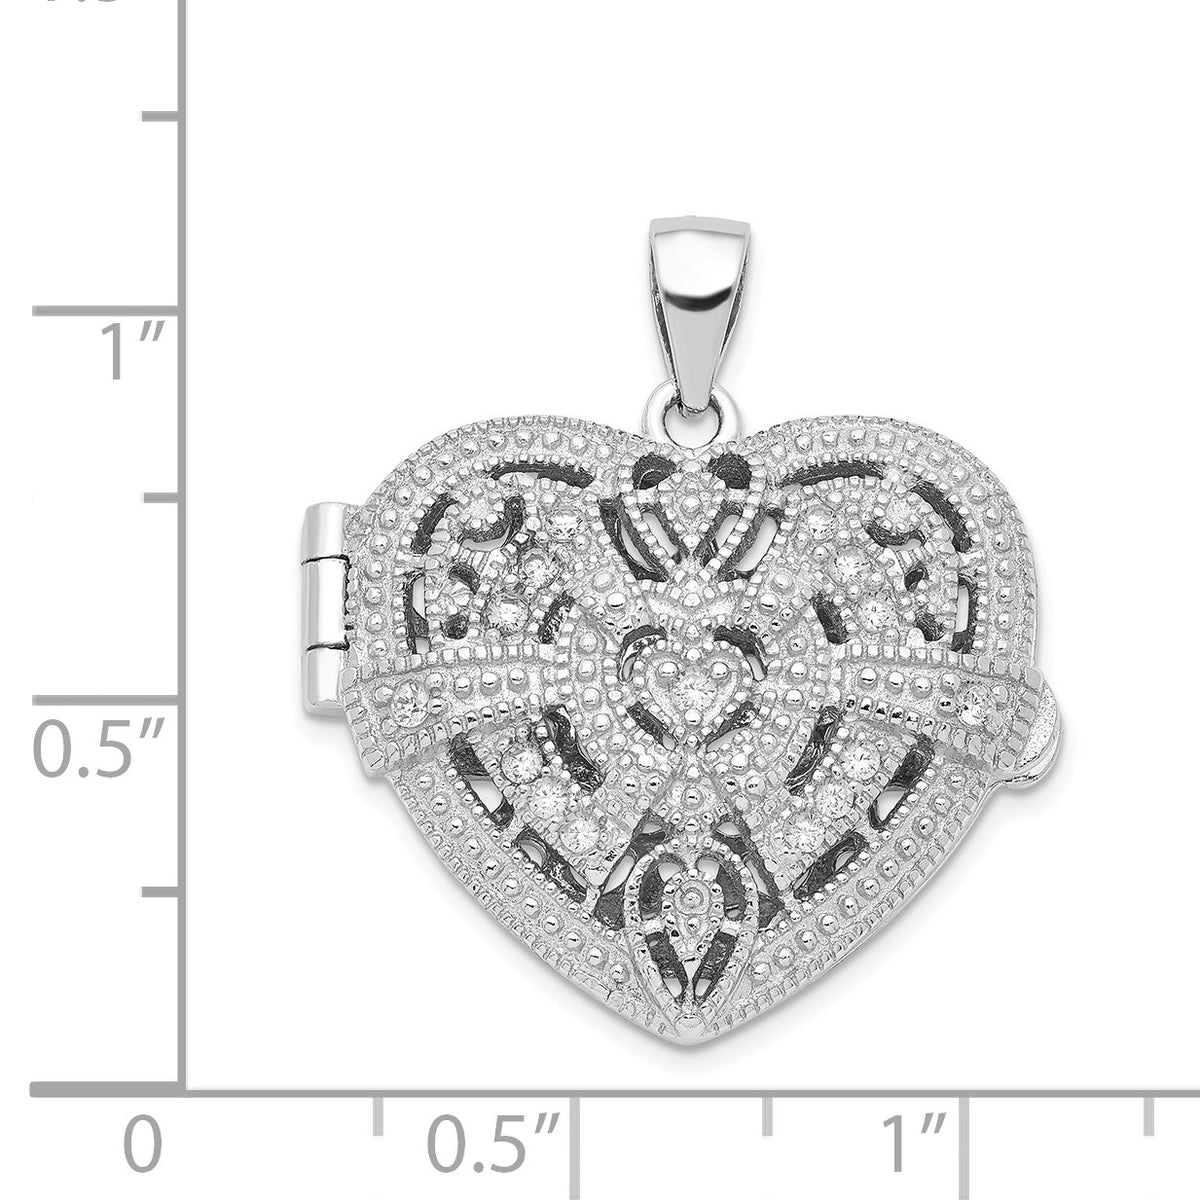 Alternate view of the Sterling Silver and CZ Textured Design Heart Locket, 22mm by The Black Bow Jewelry Co.